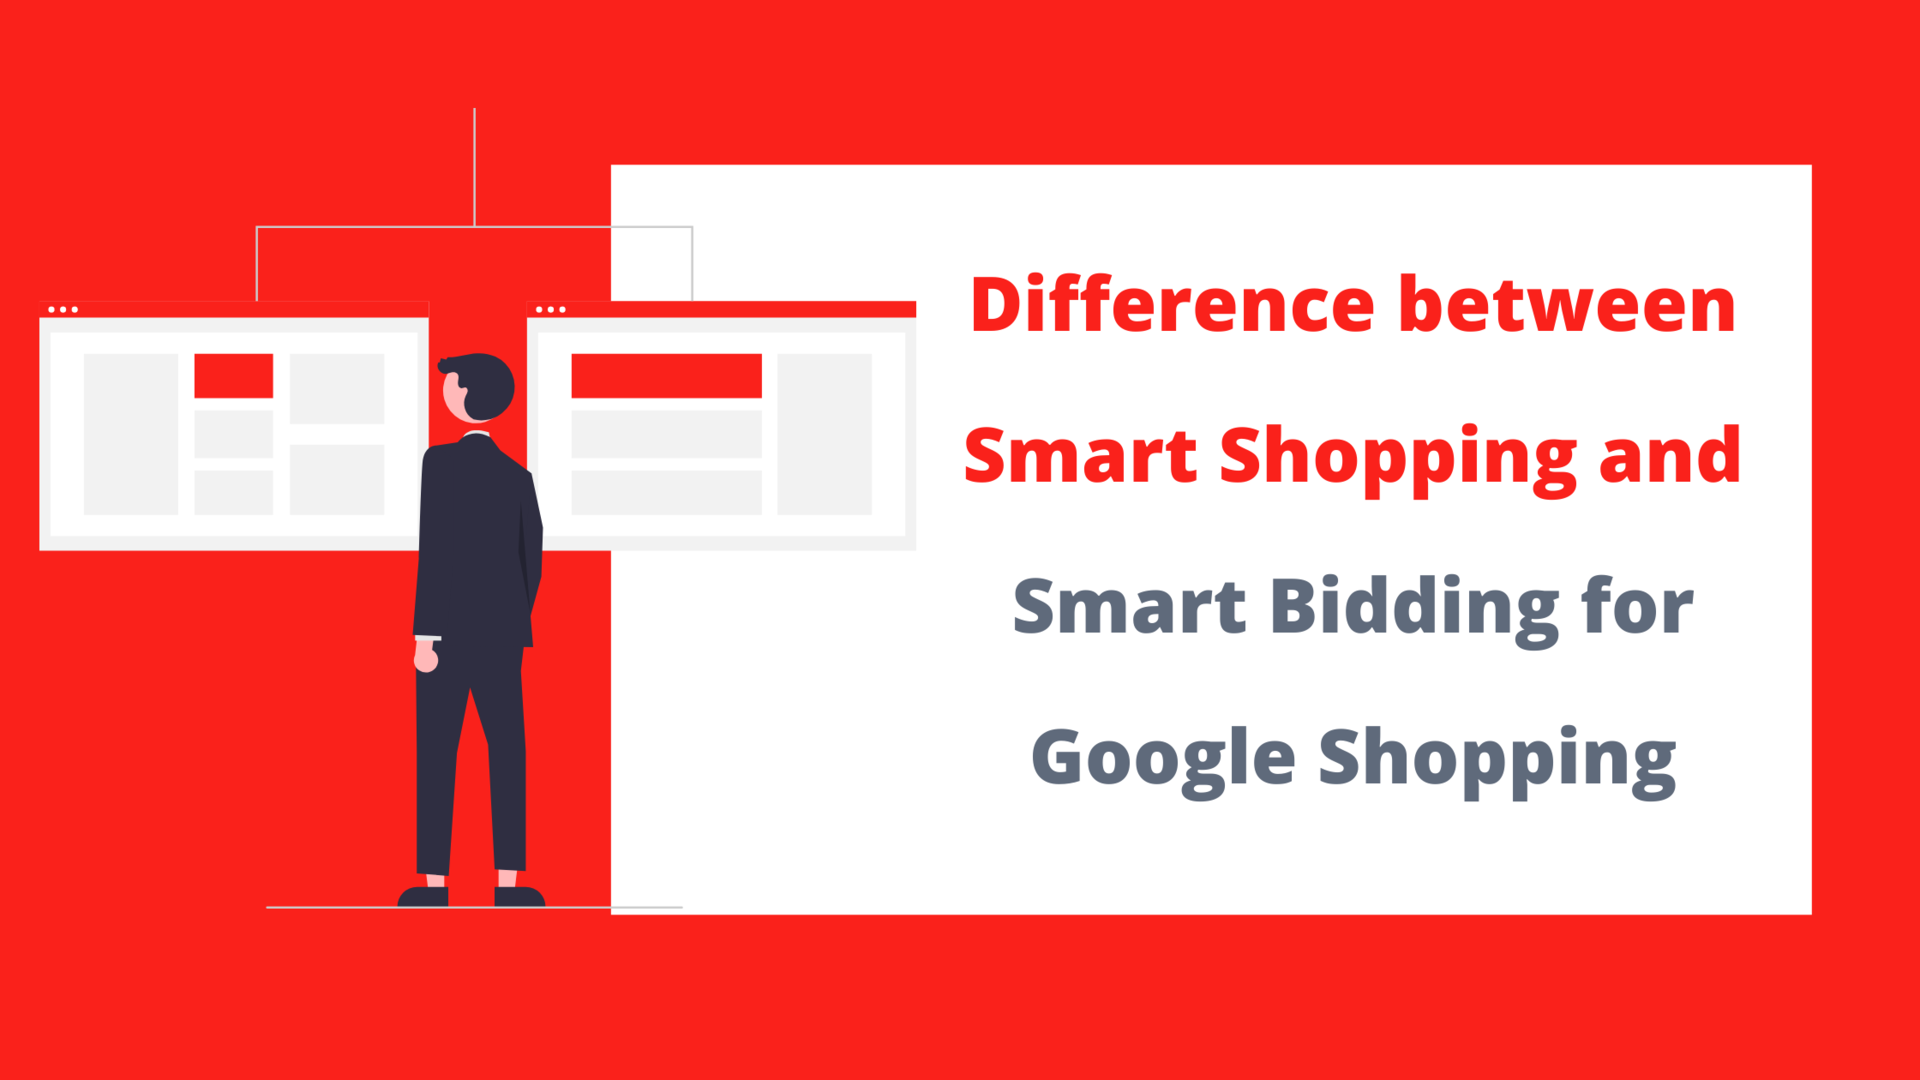 Difference between Smart Shopping and Smart Bidding for Google Shopping